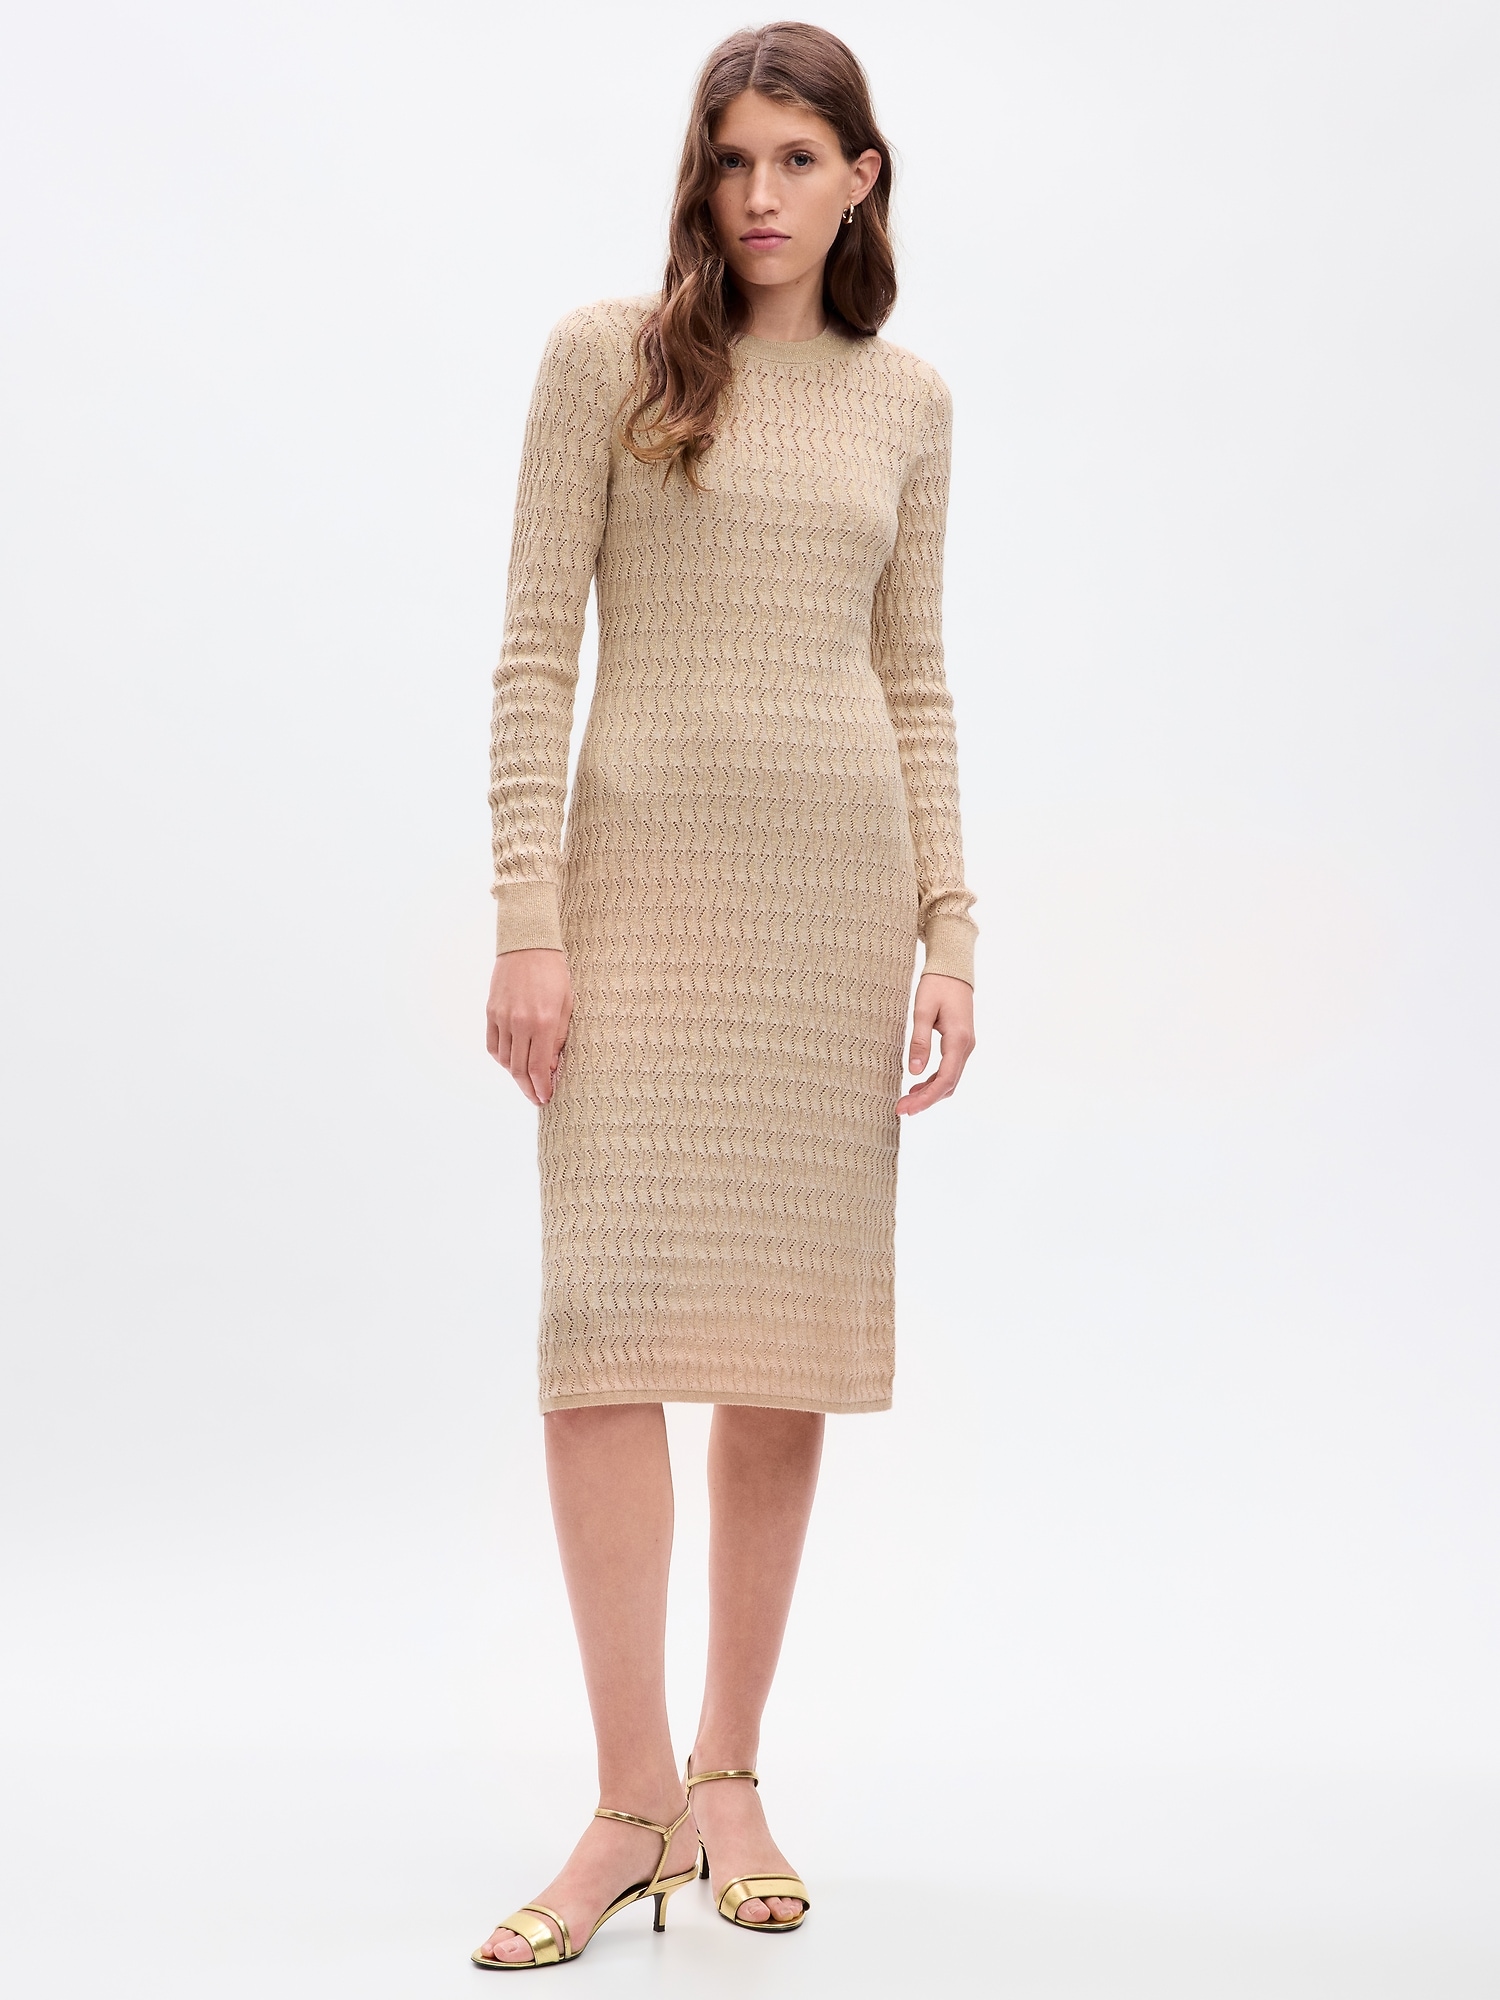 From Warm Knits To Satins, Here Are The Best Winter Dresses So Far - We  Select Dresses